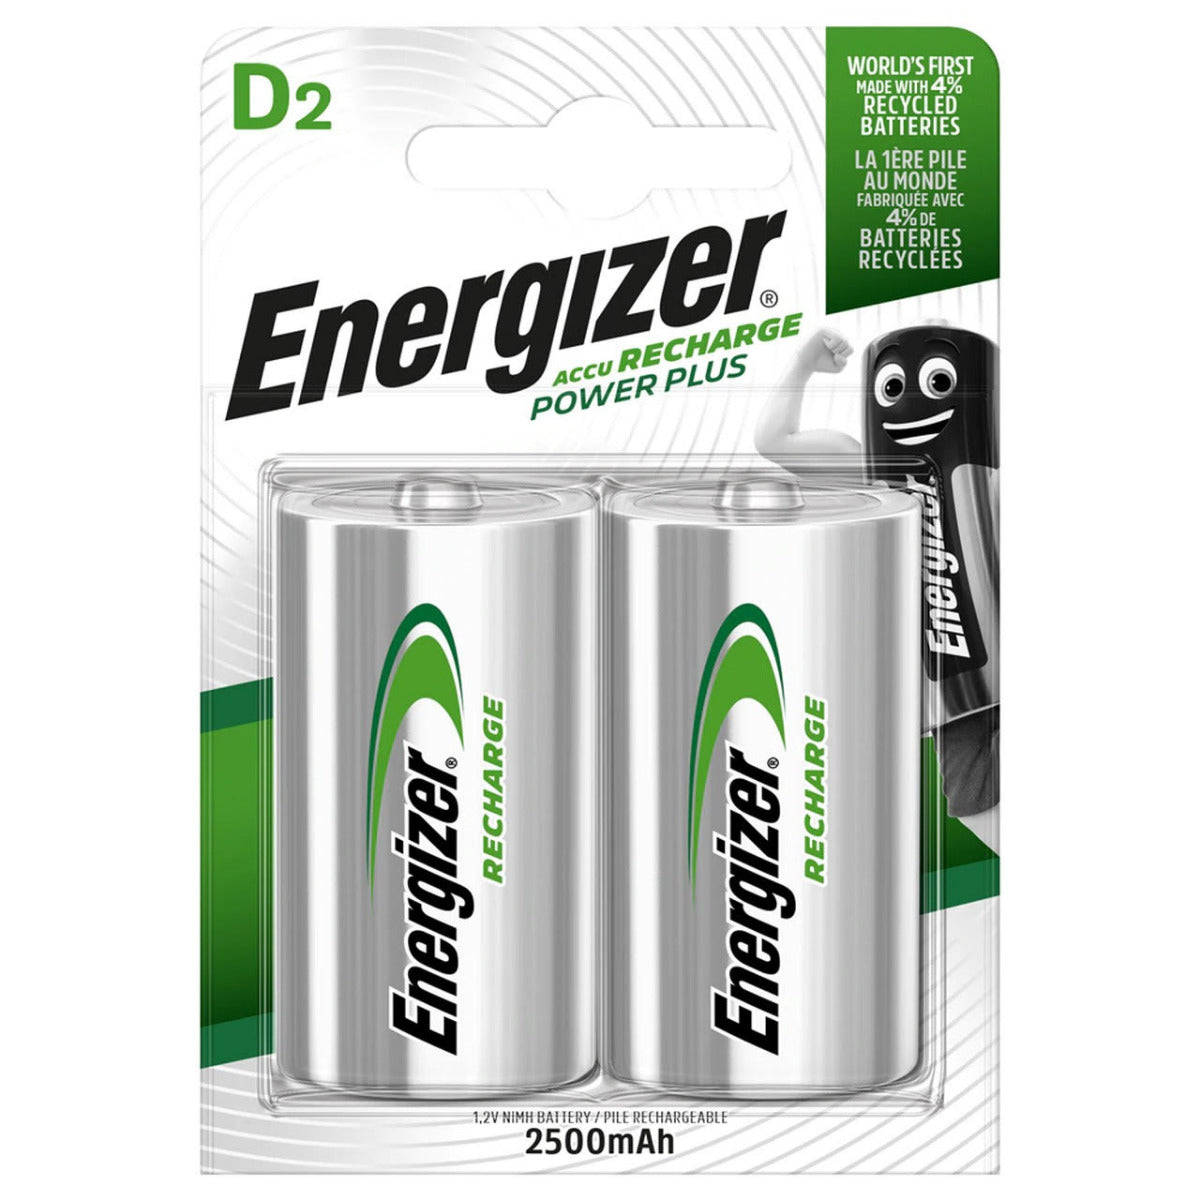 2x Piles Energizer Rechargeables Extreme AA